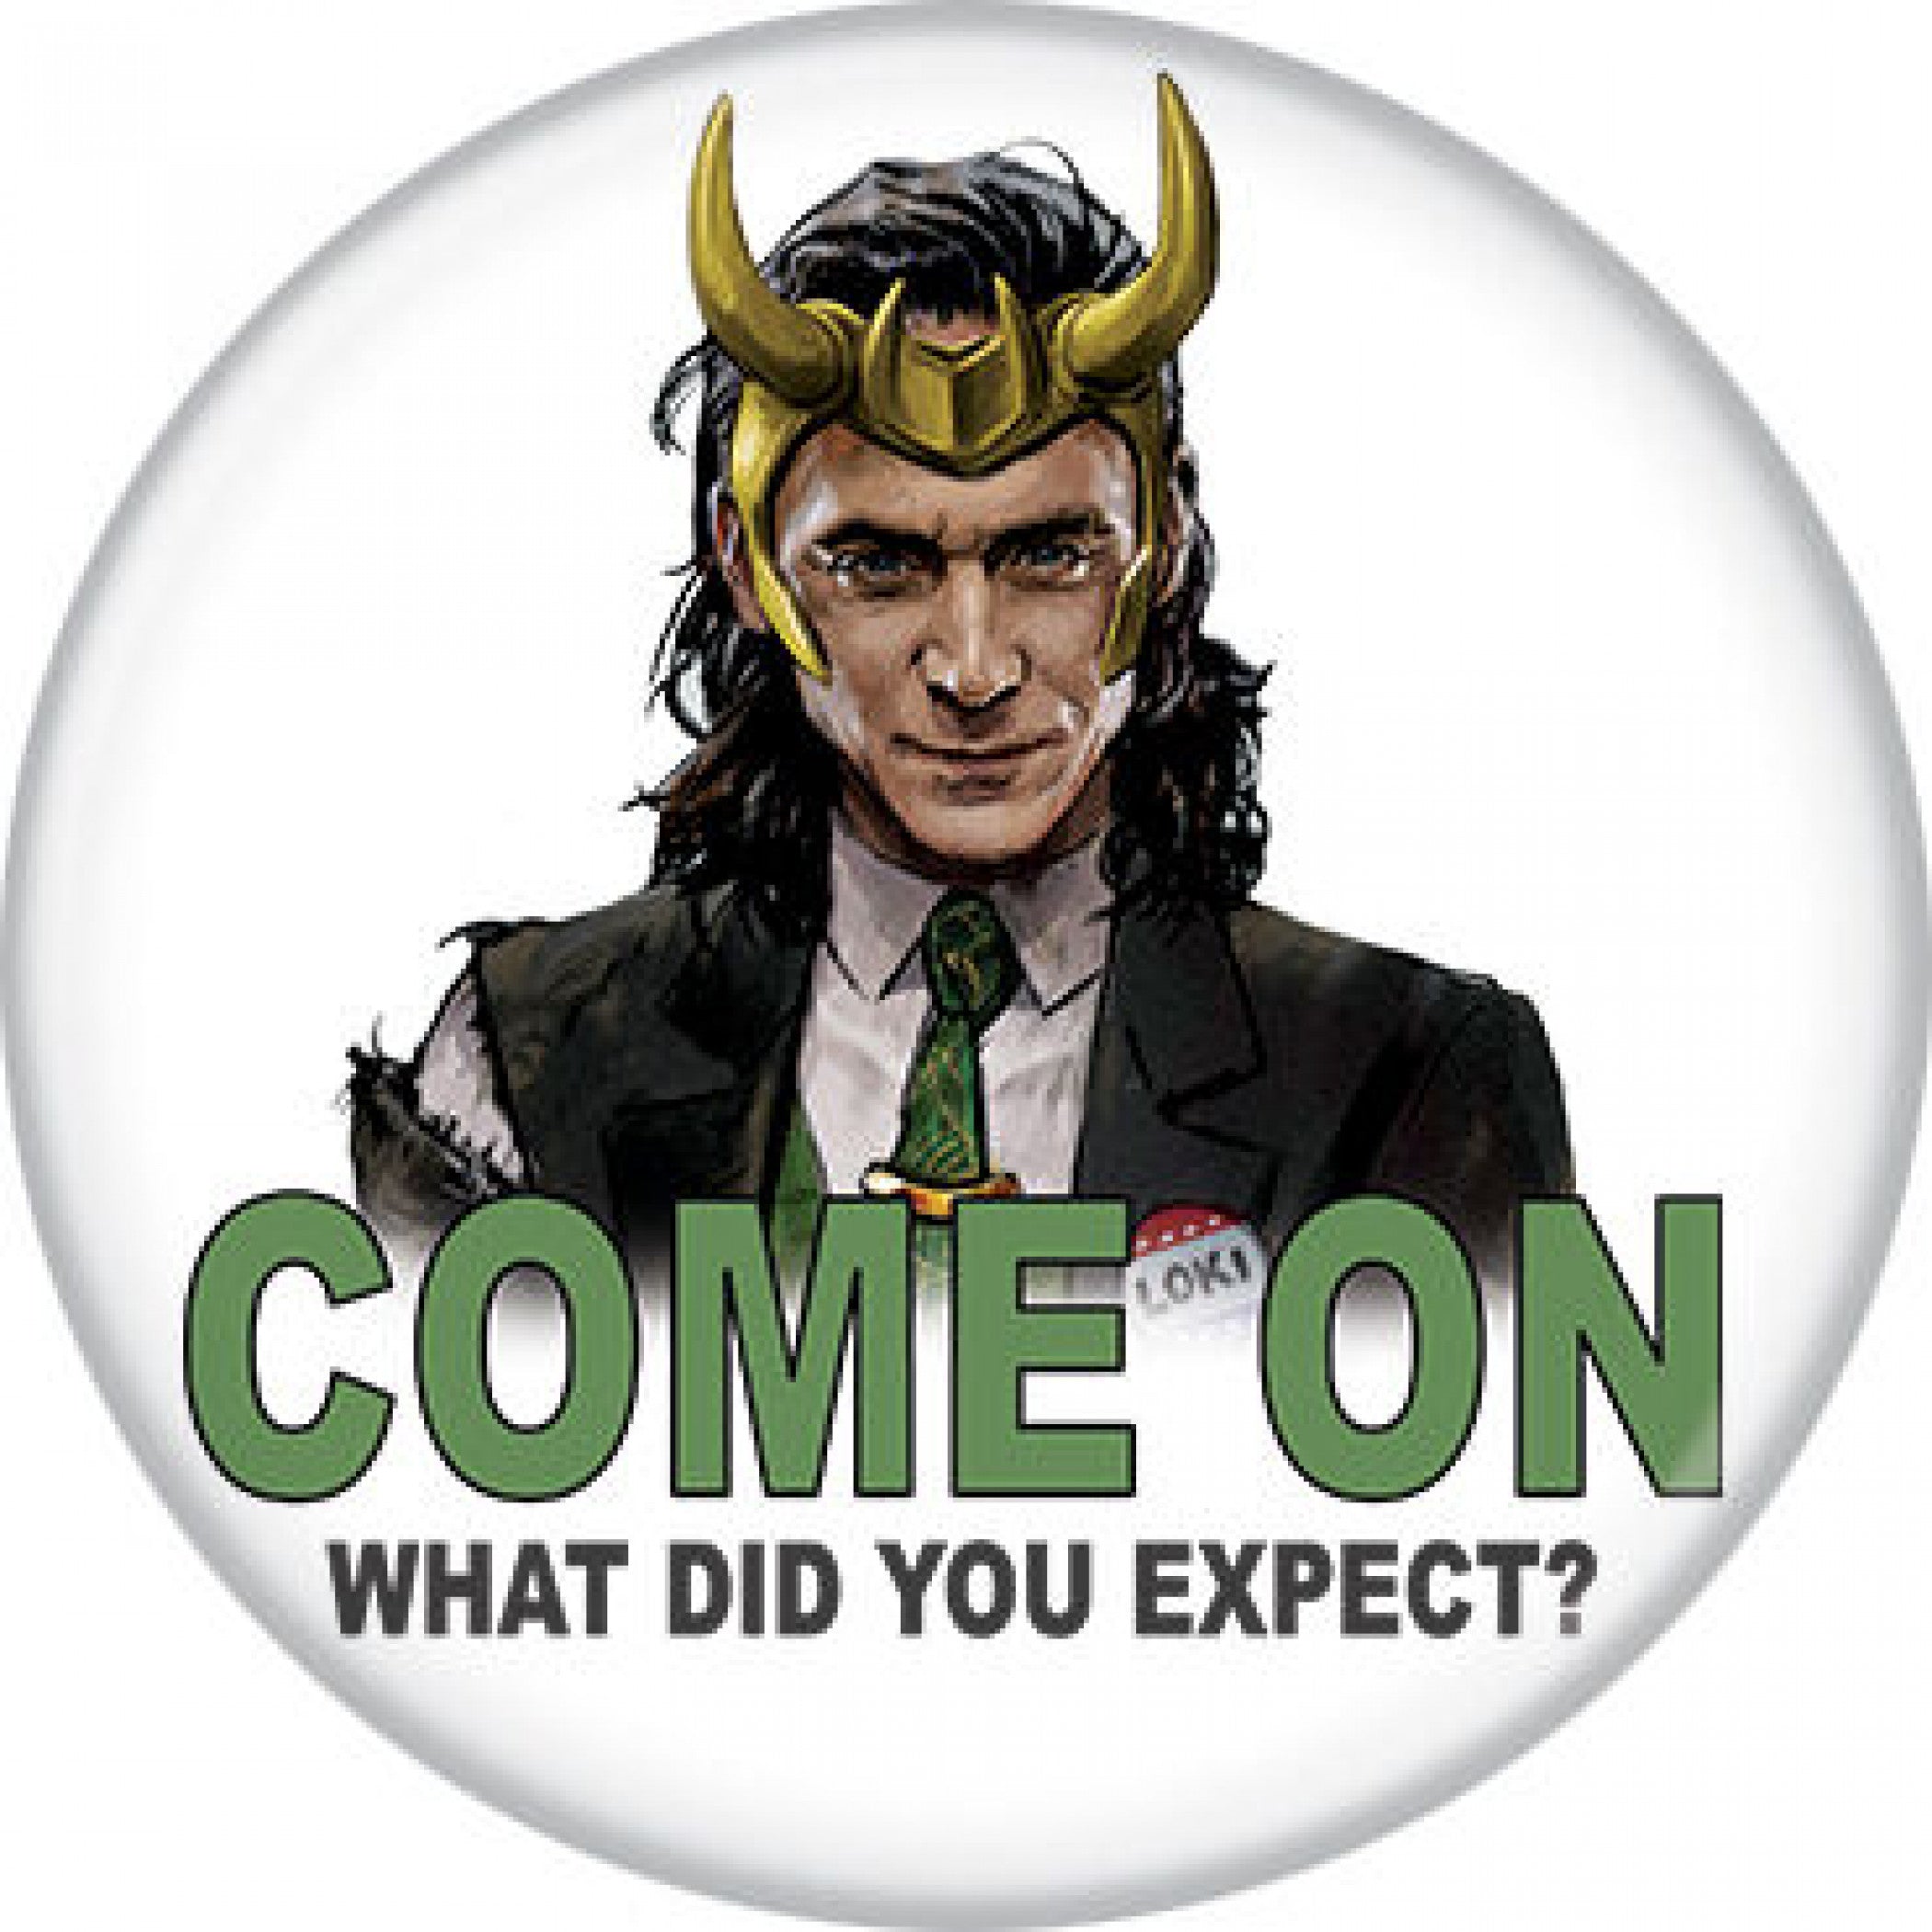 Marvel Studios Loki Series Come On What Did You Expect? Button